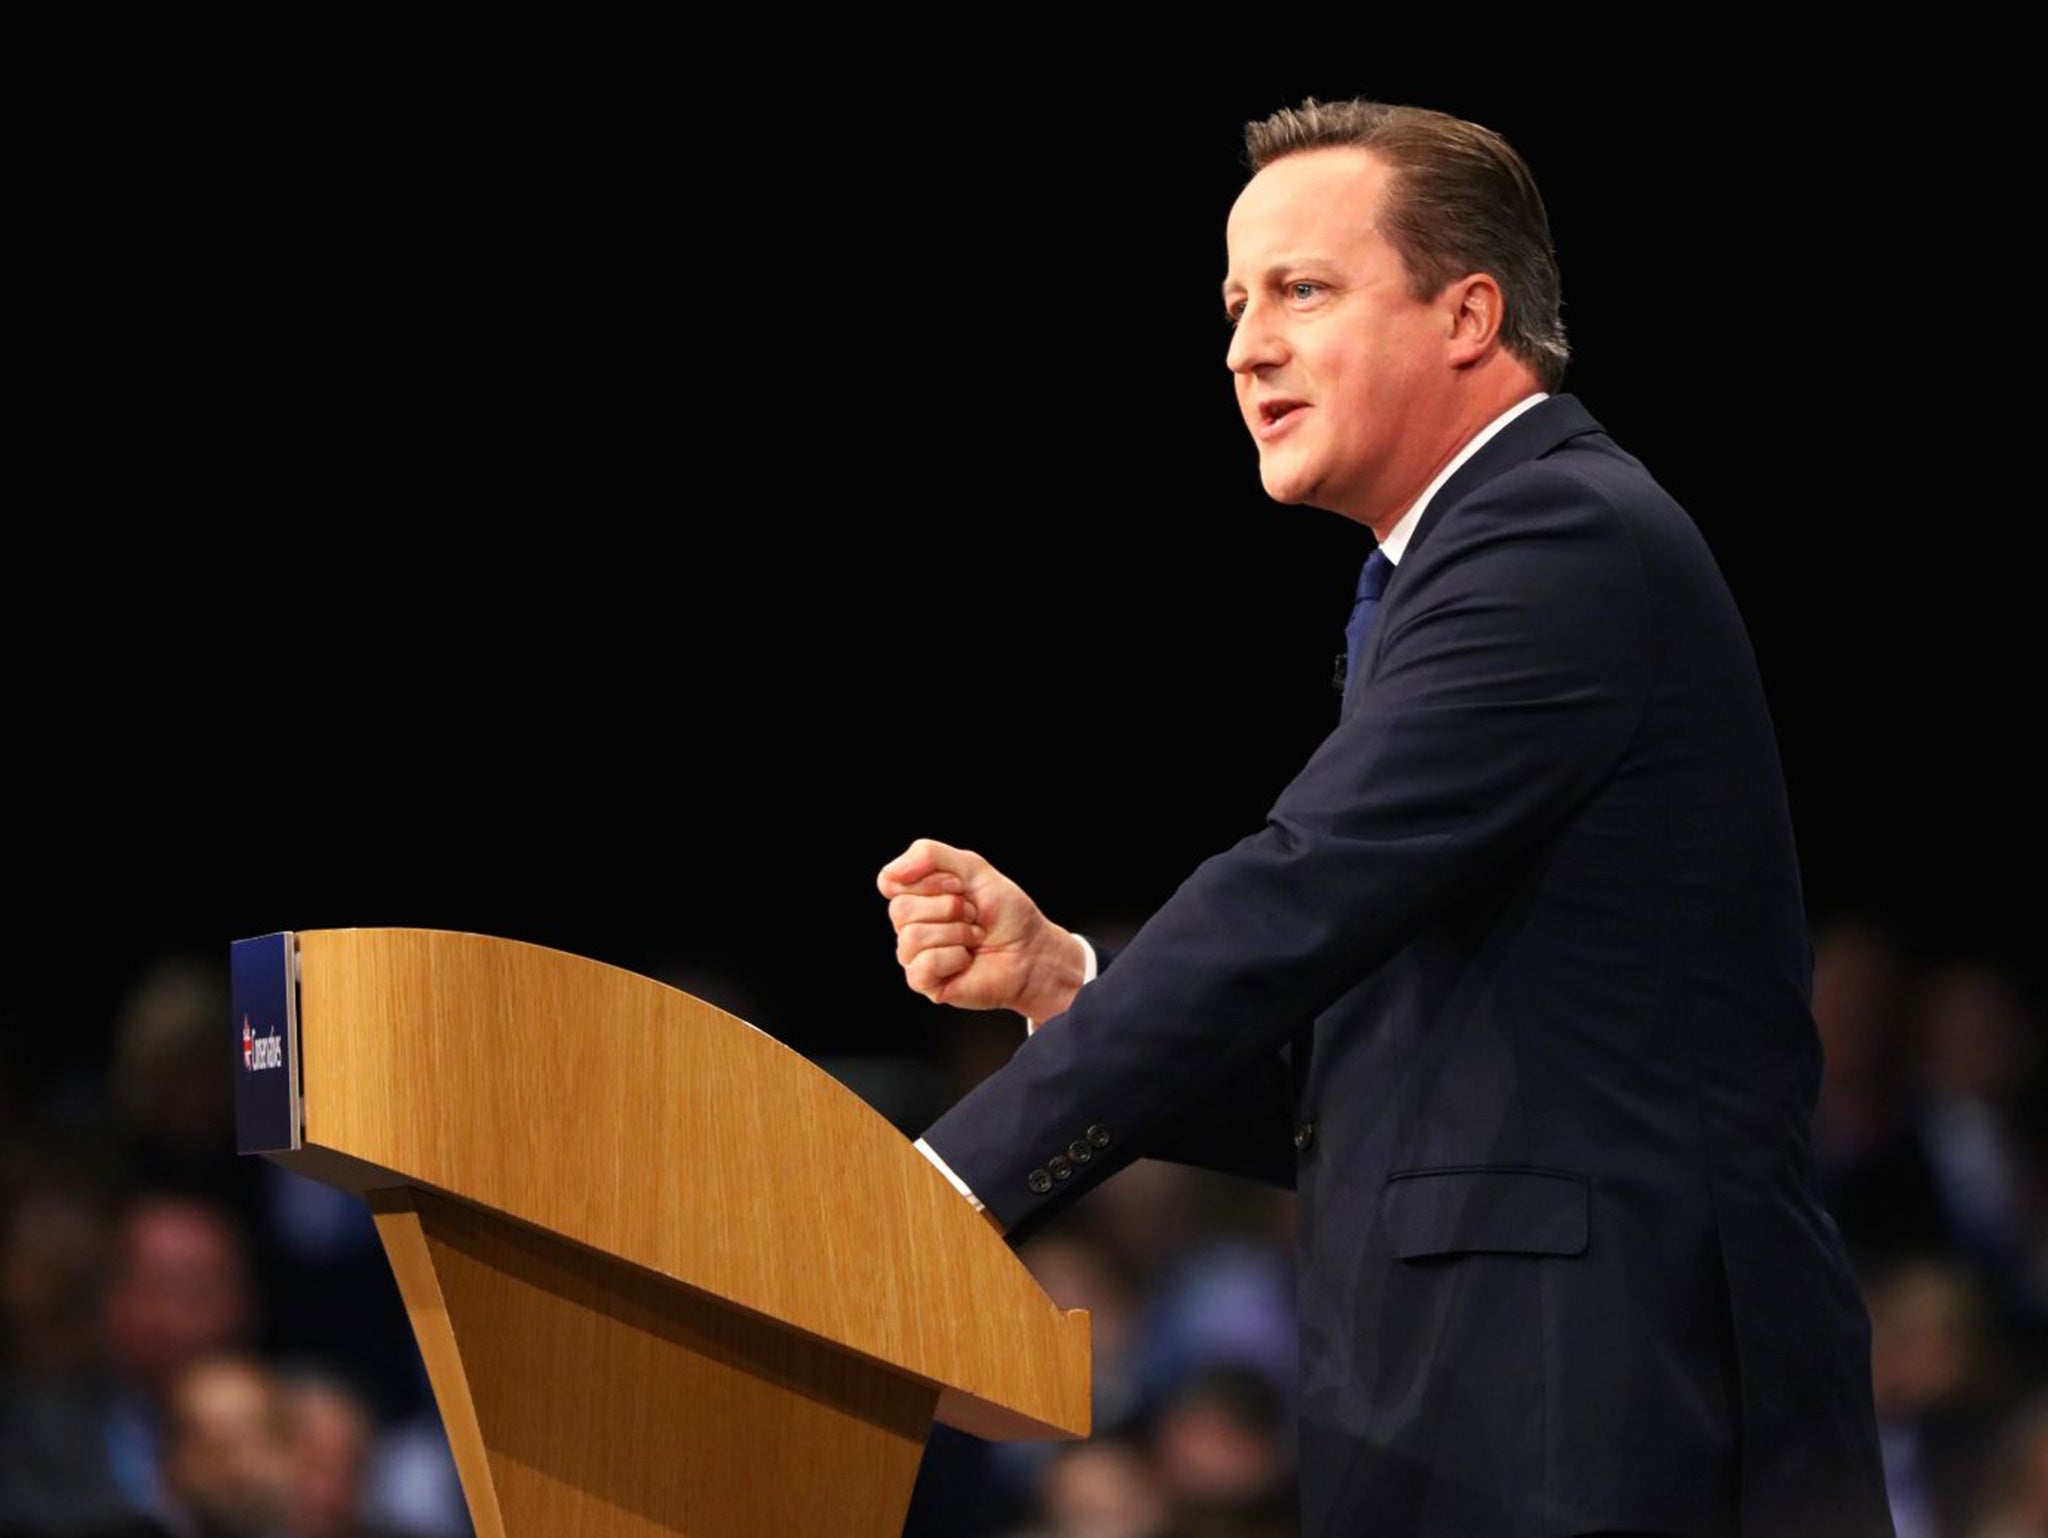 David Cameron gives his keynote speech to delegates on the fourth and final day of the Conservative Party Conference